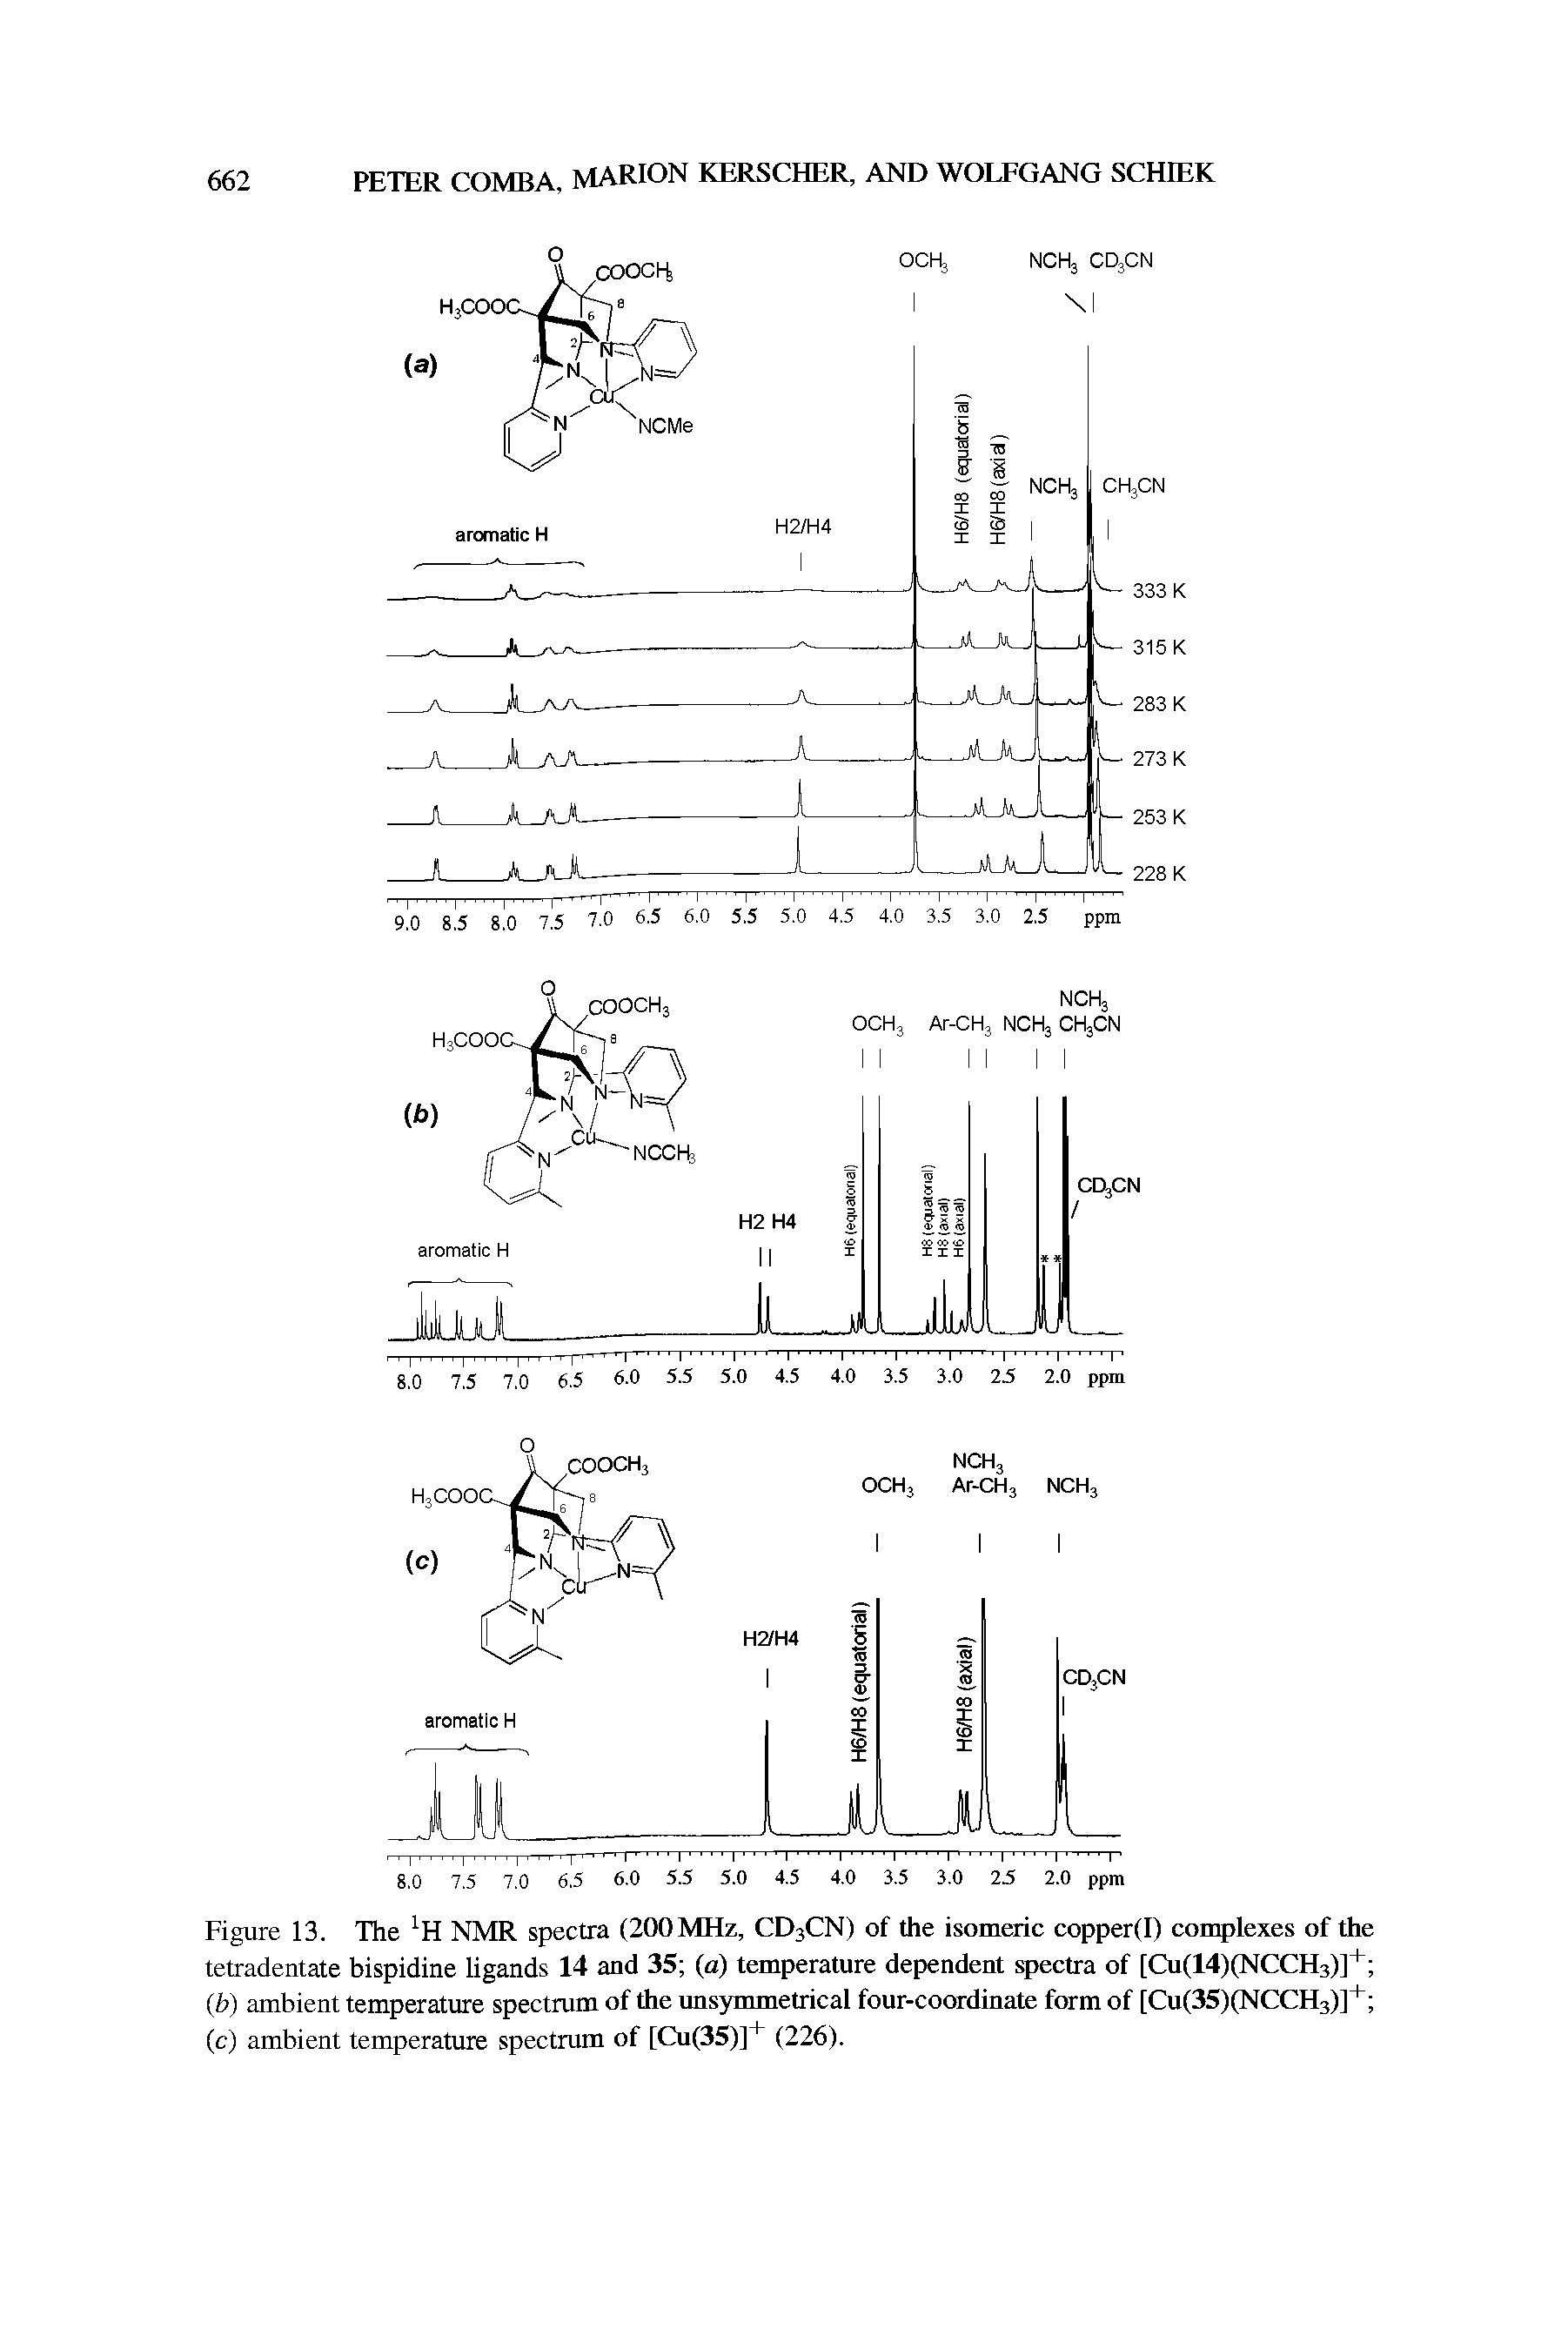 Figure 13. The NMR spectra (200MHz, CDjCN) of the isomeric copper(I) conq>lexes of the tetradentate bispidine ligands 14 and 35 (a) temperature dependent spectra of [Cu(14)(NCCH3)]+ ...